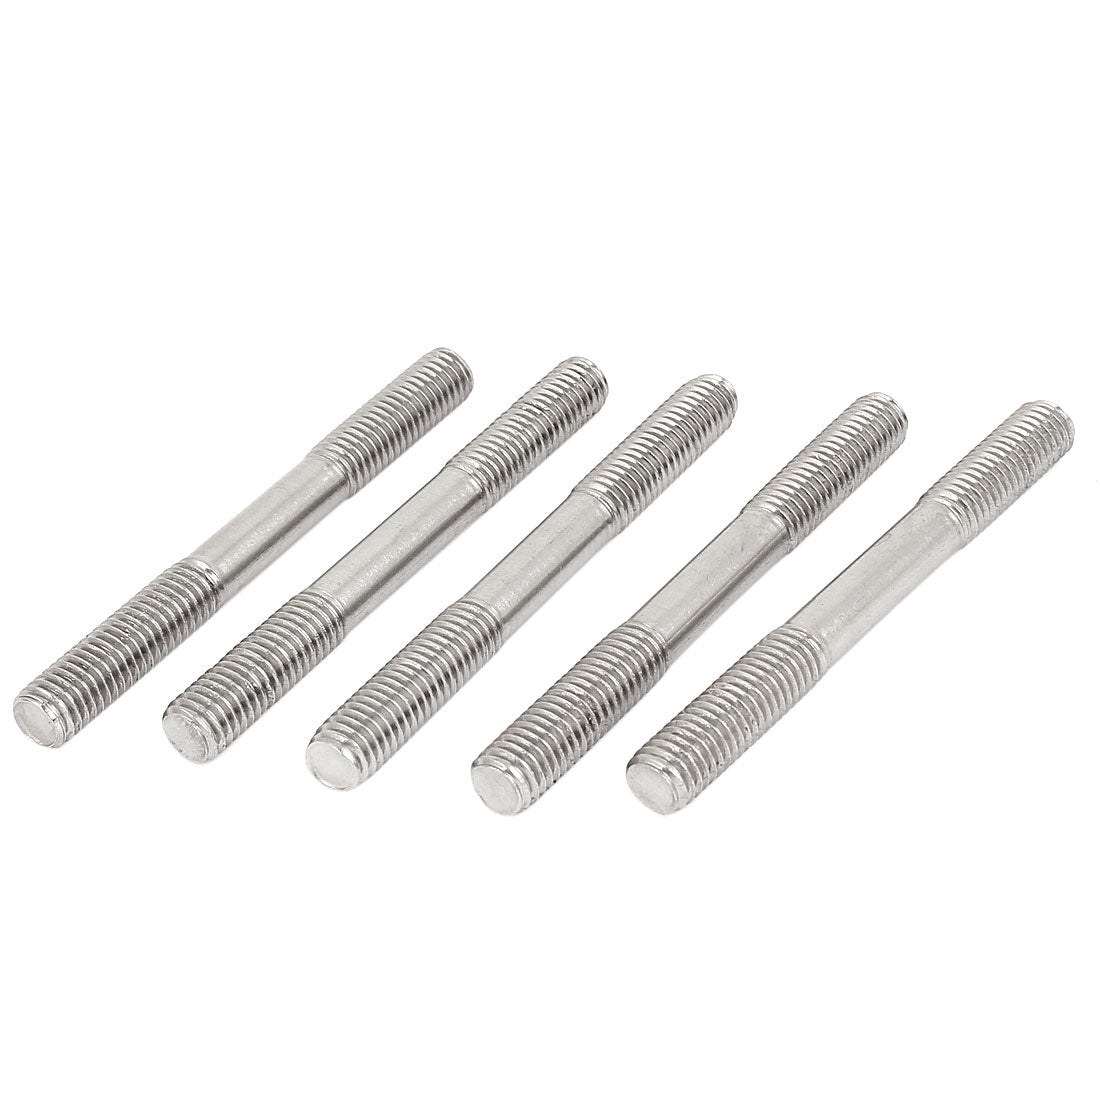 uxcell Uxcell M8 x 80mm Metric A2 Stainless Steel Double End Threaded Stud Screw Bolt 5 Pcs